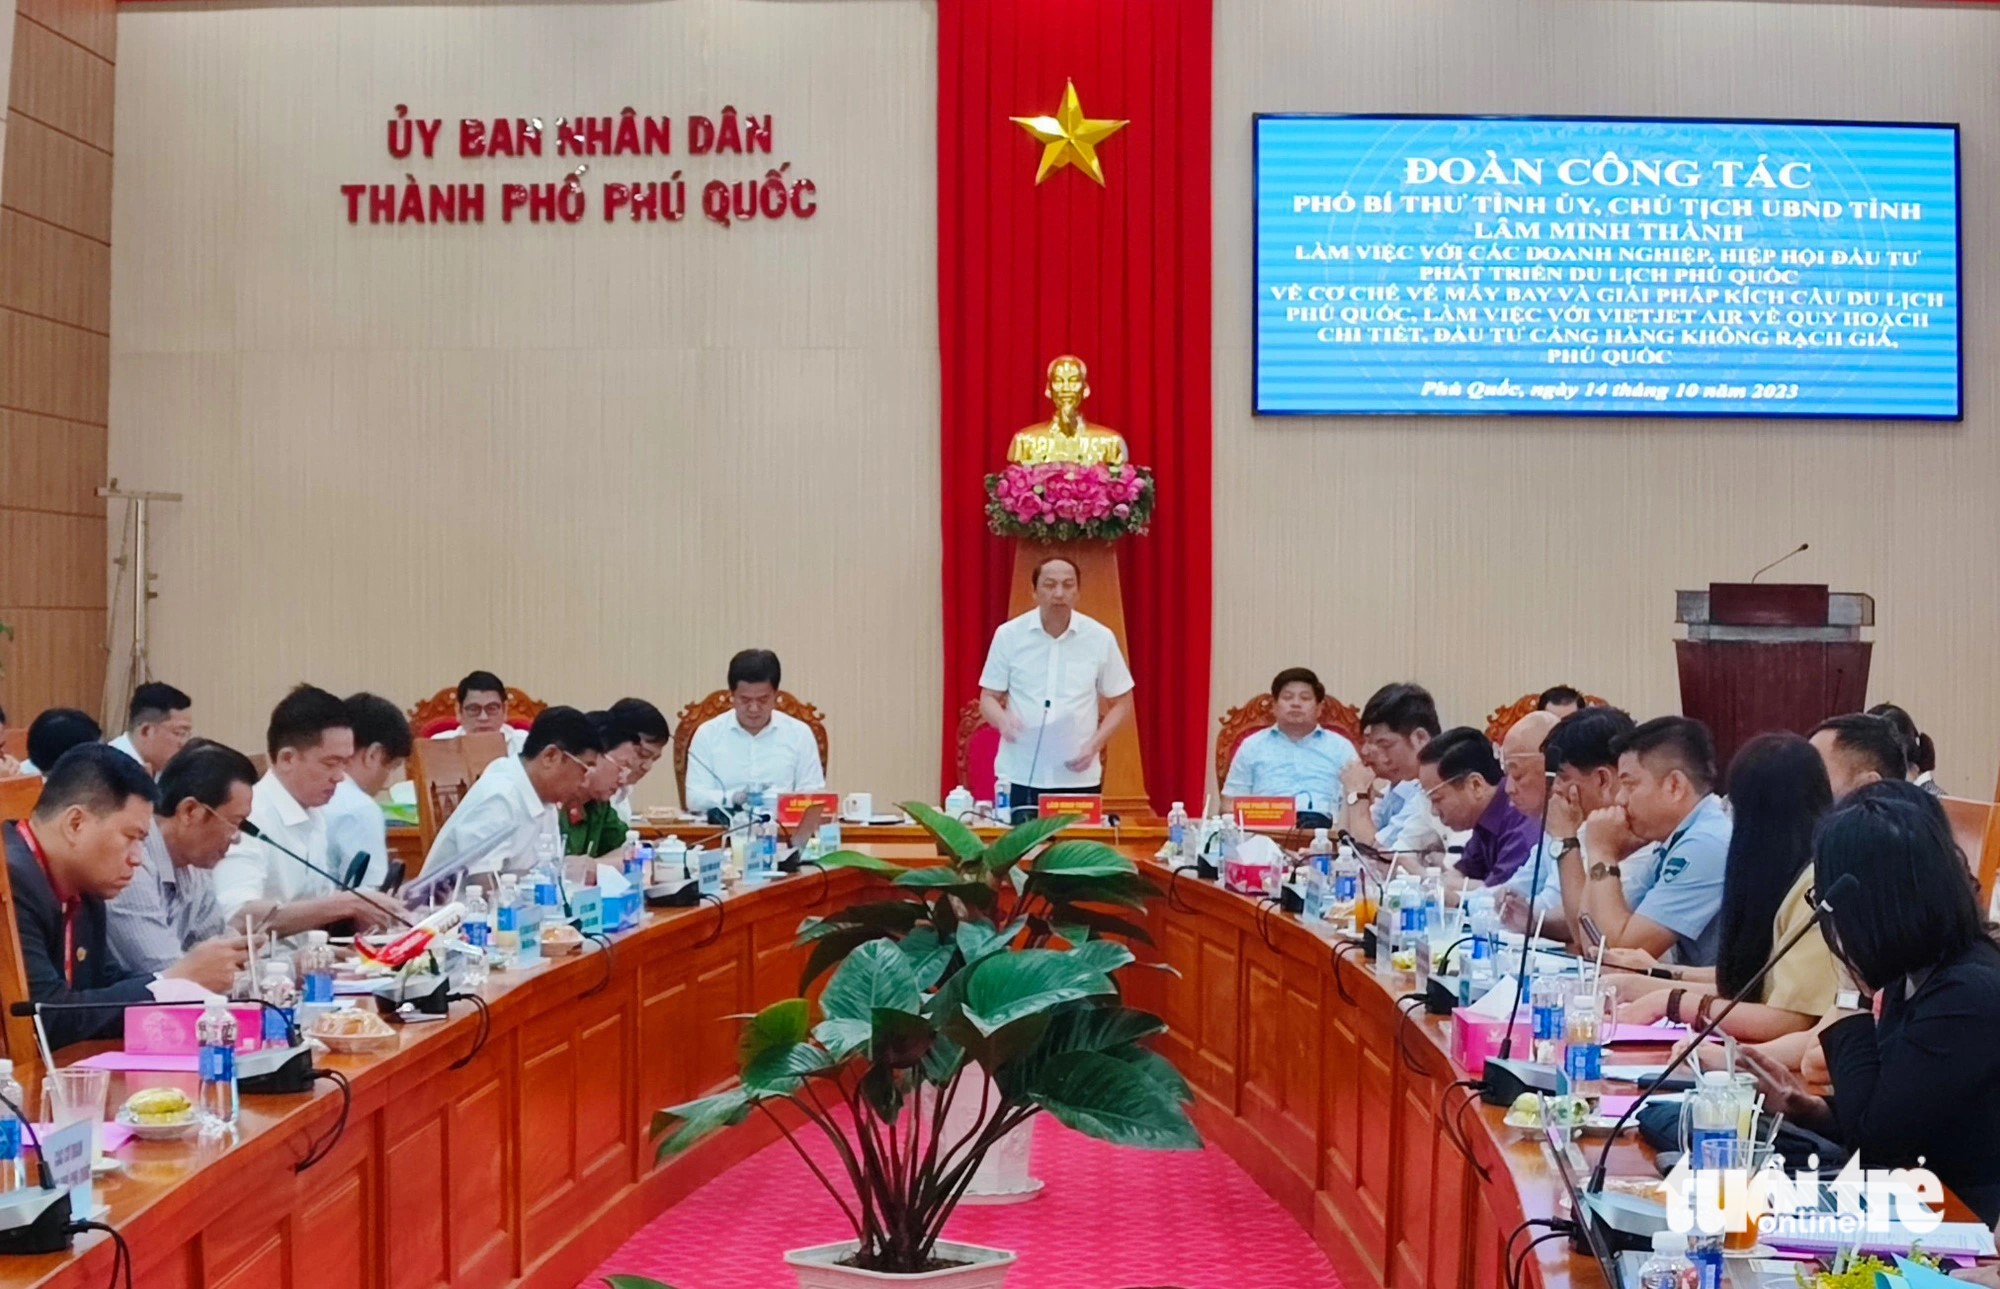 Authorities discuss how to revive tourism for Vietnam’s Phu Quoc Island